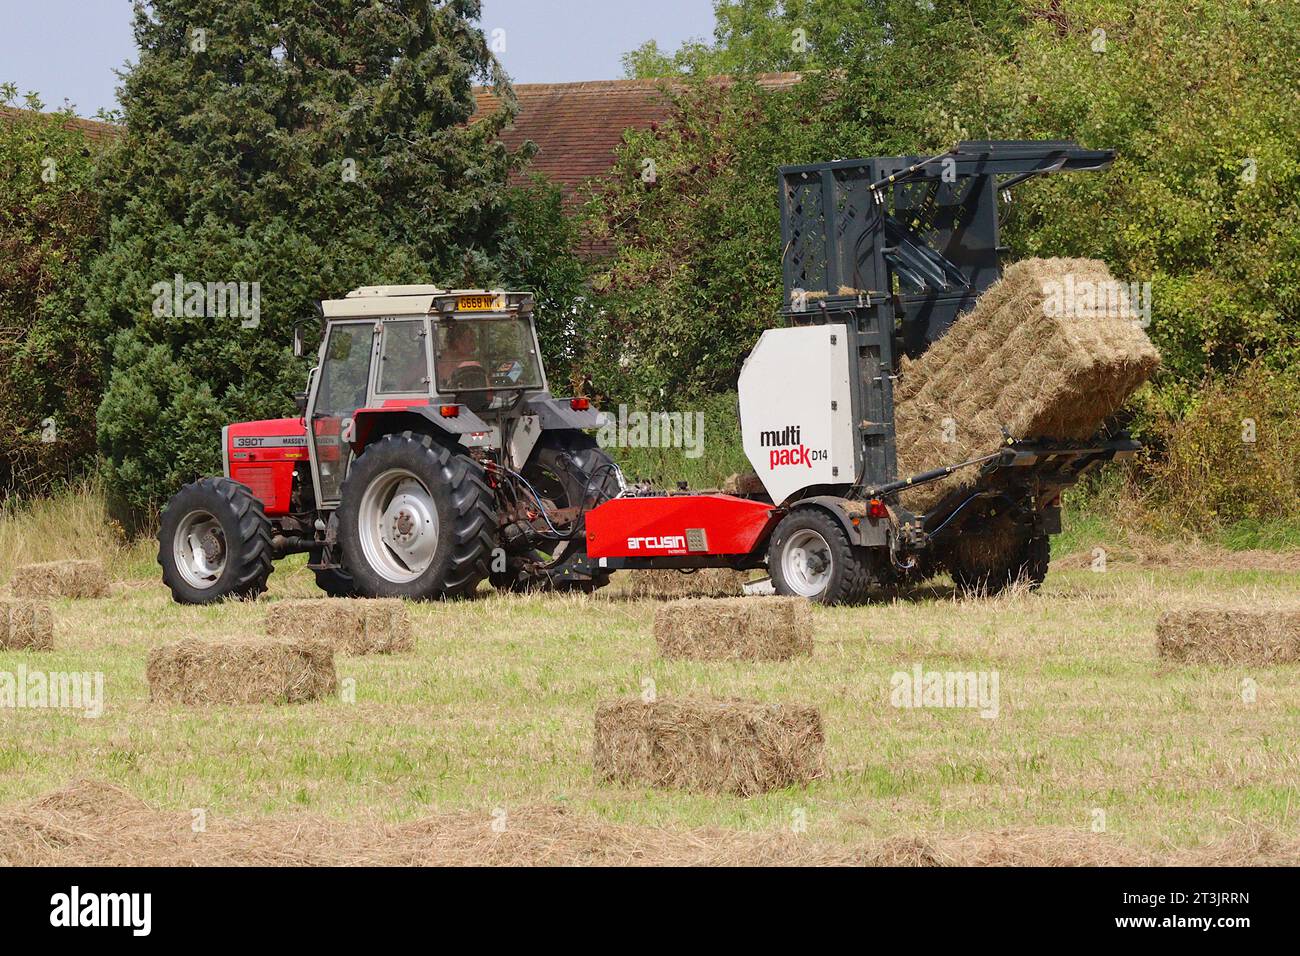 Arcusin D14 multi pack baler releases a large bound hay bale made up of 14 single rectangular bales,      driven by a Massey Ferguson 390T tractor. Stock Photo